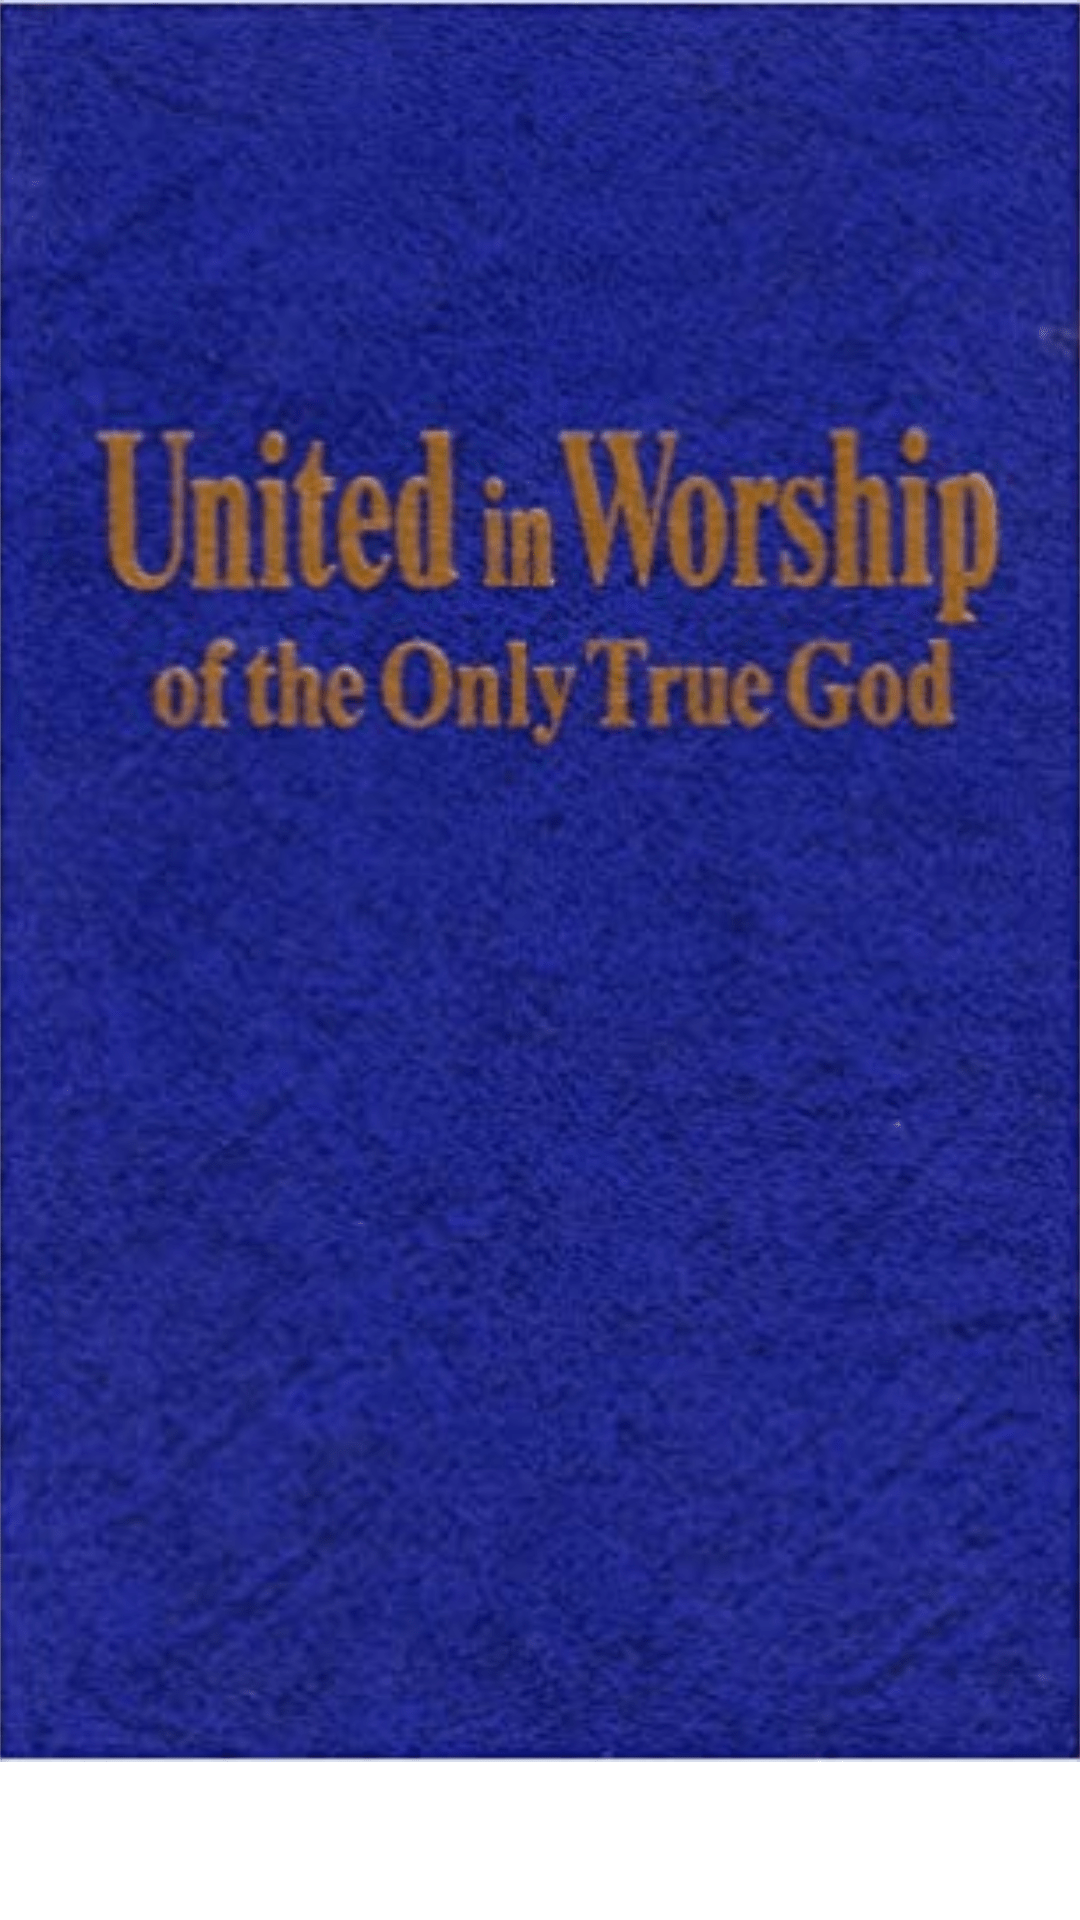 United in Worship of the Only True God